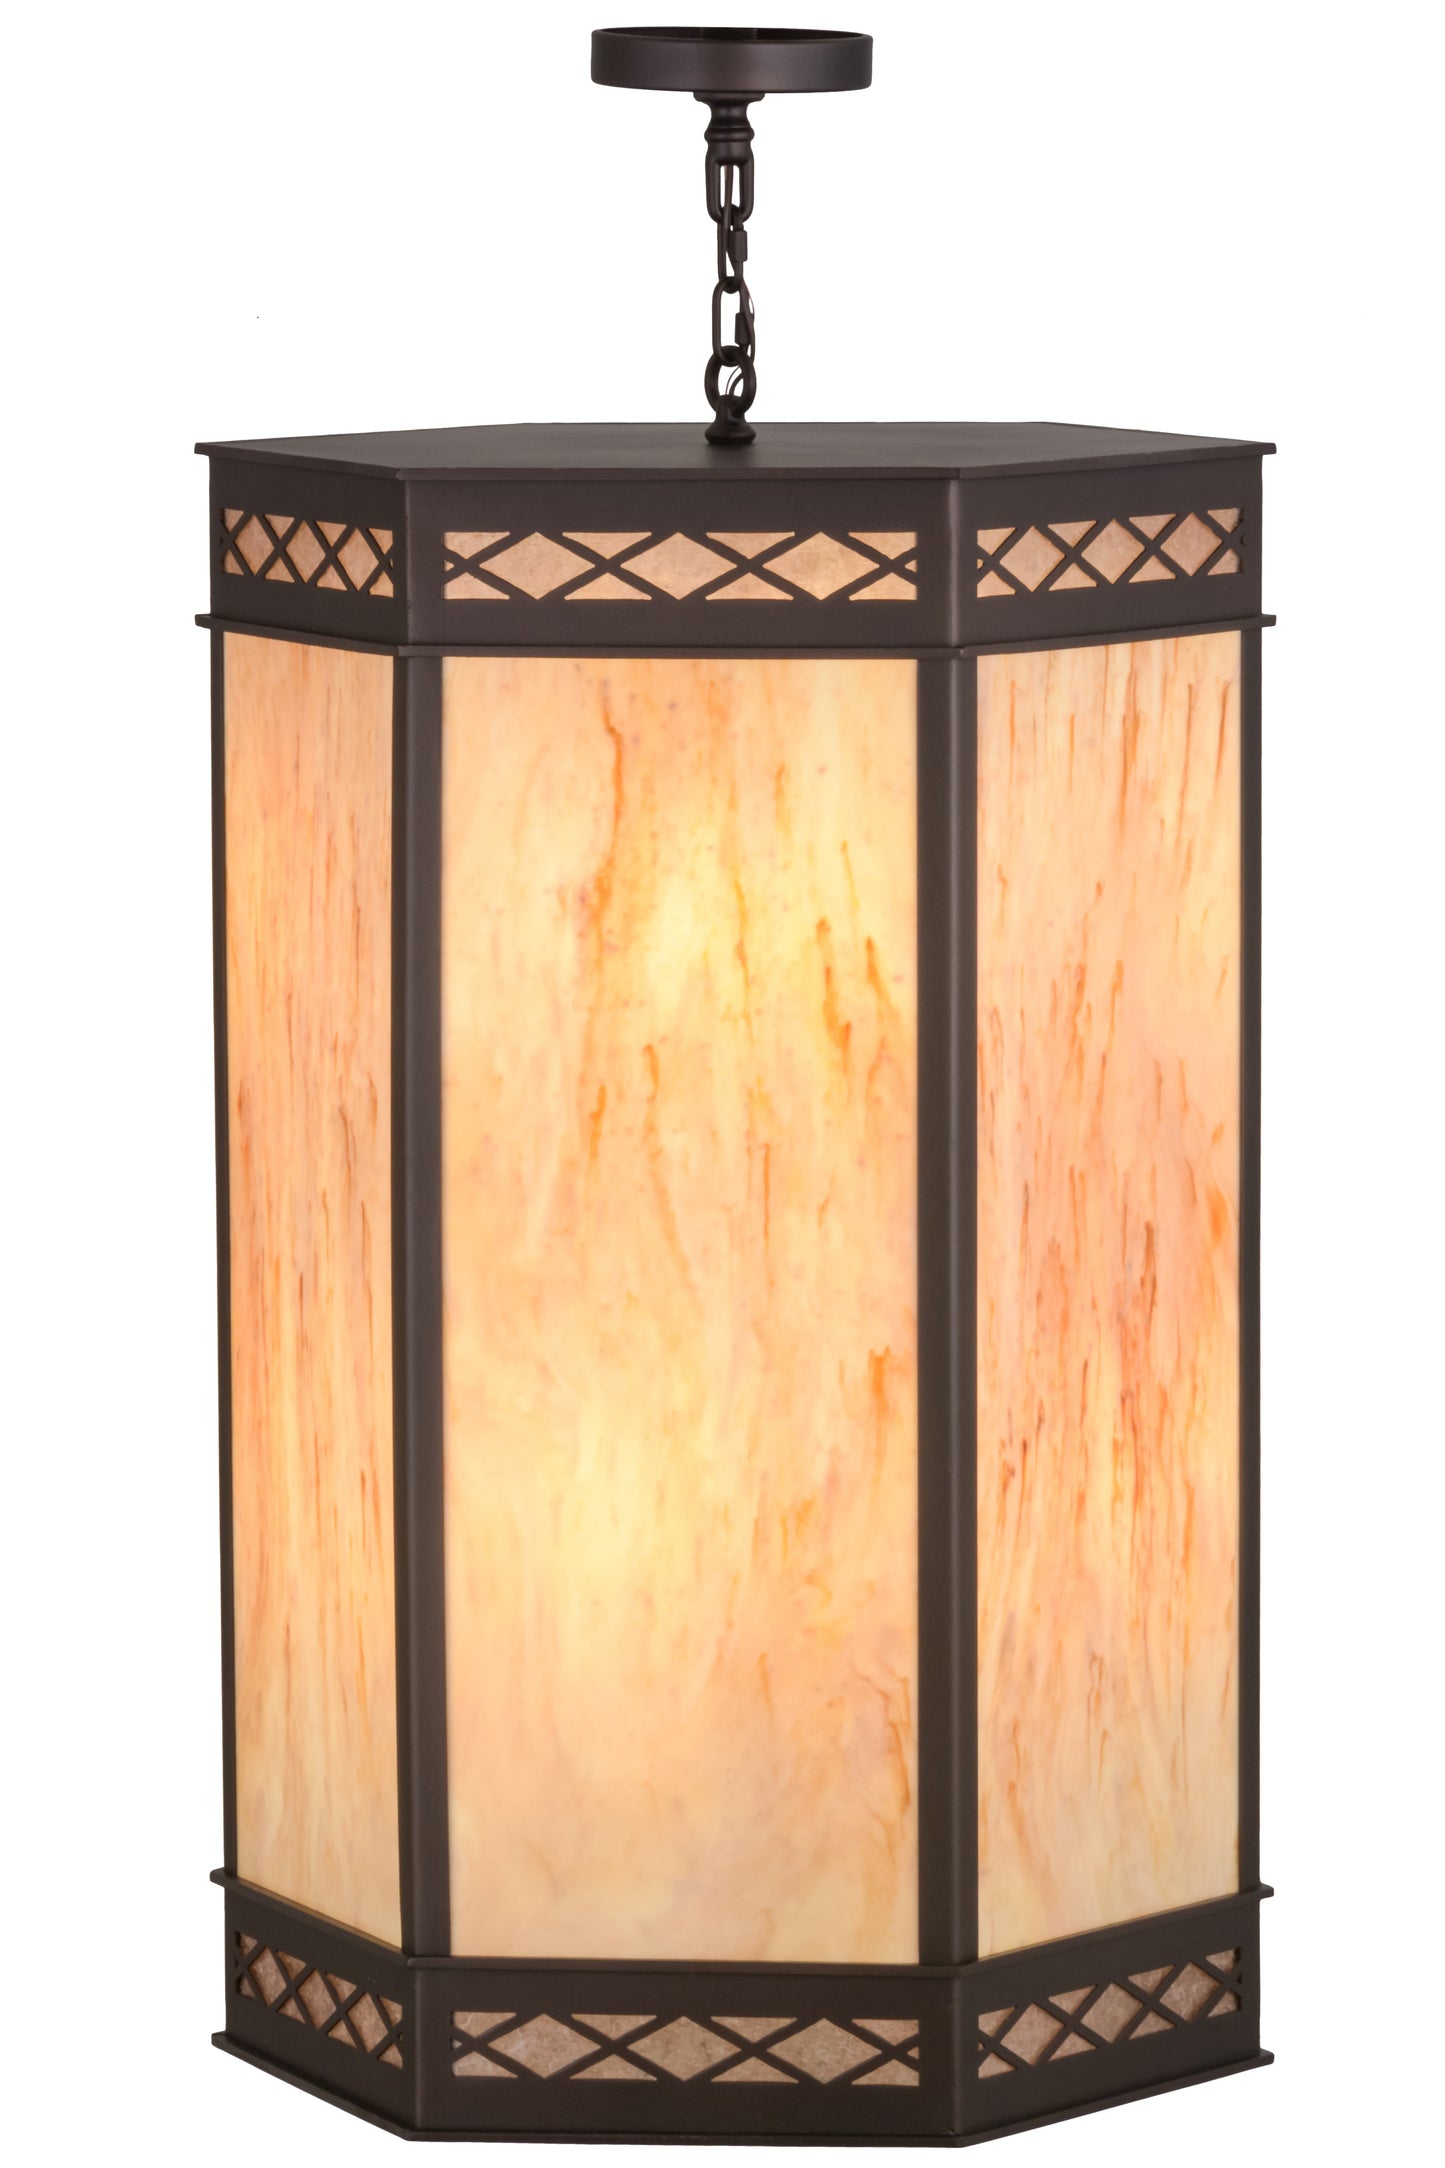 24" Estancia Pendant by 2nd Ave Lighting